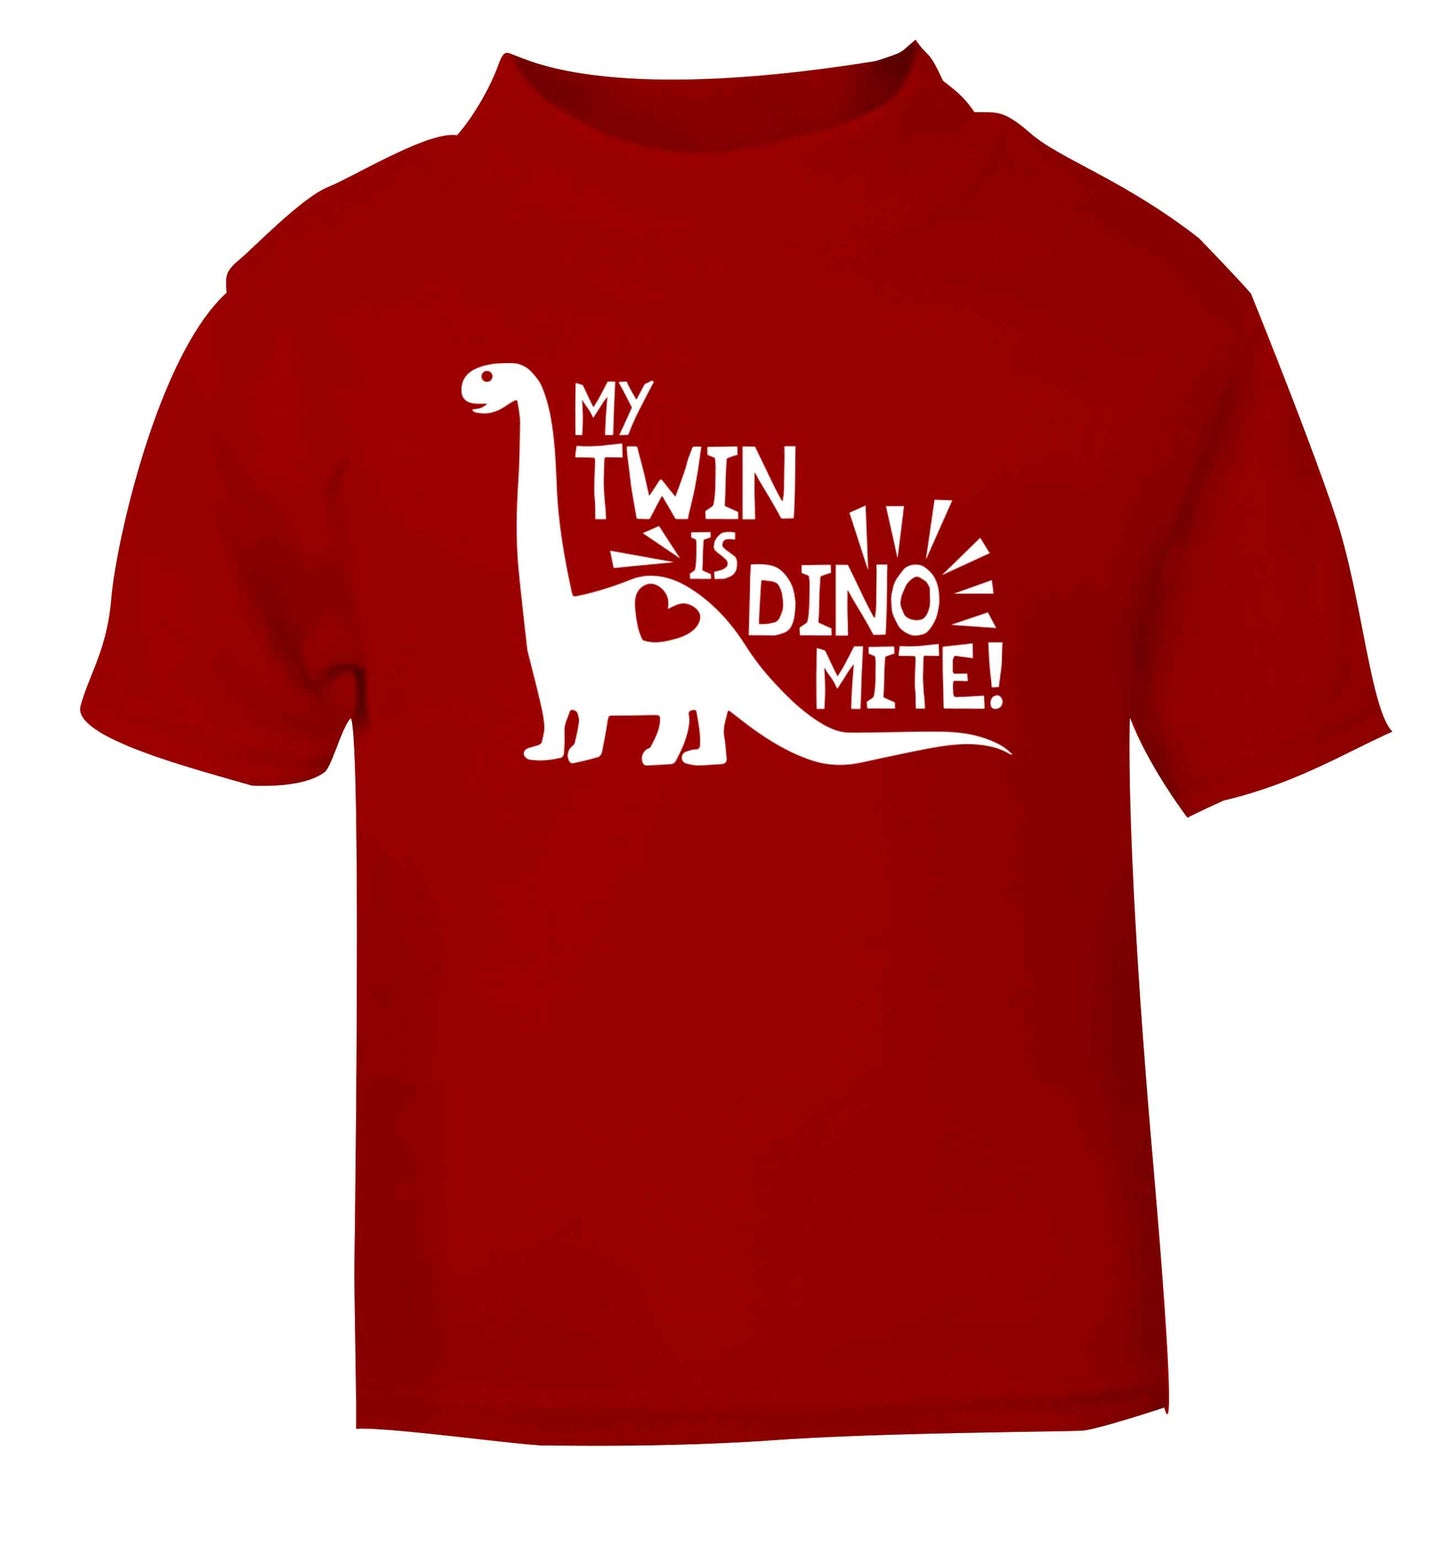 My twin is dinomite! red Baby Toddler Tshirt 2 Years